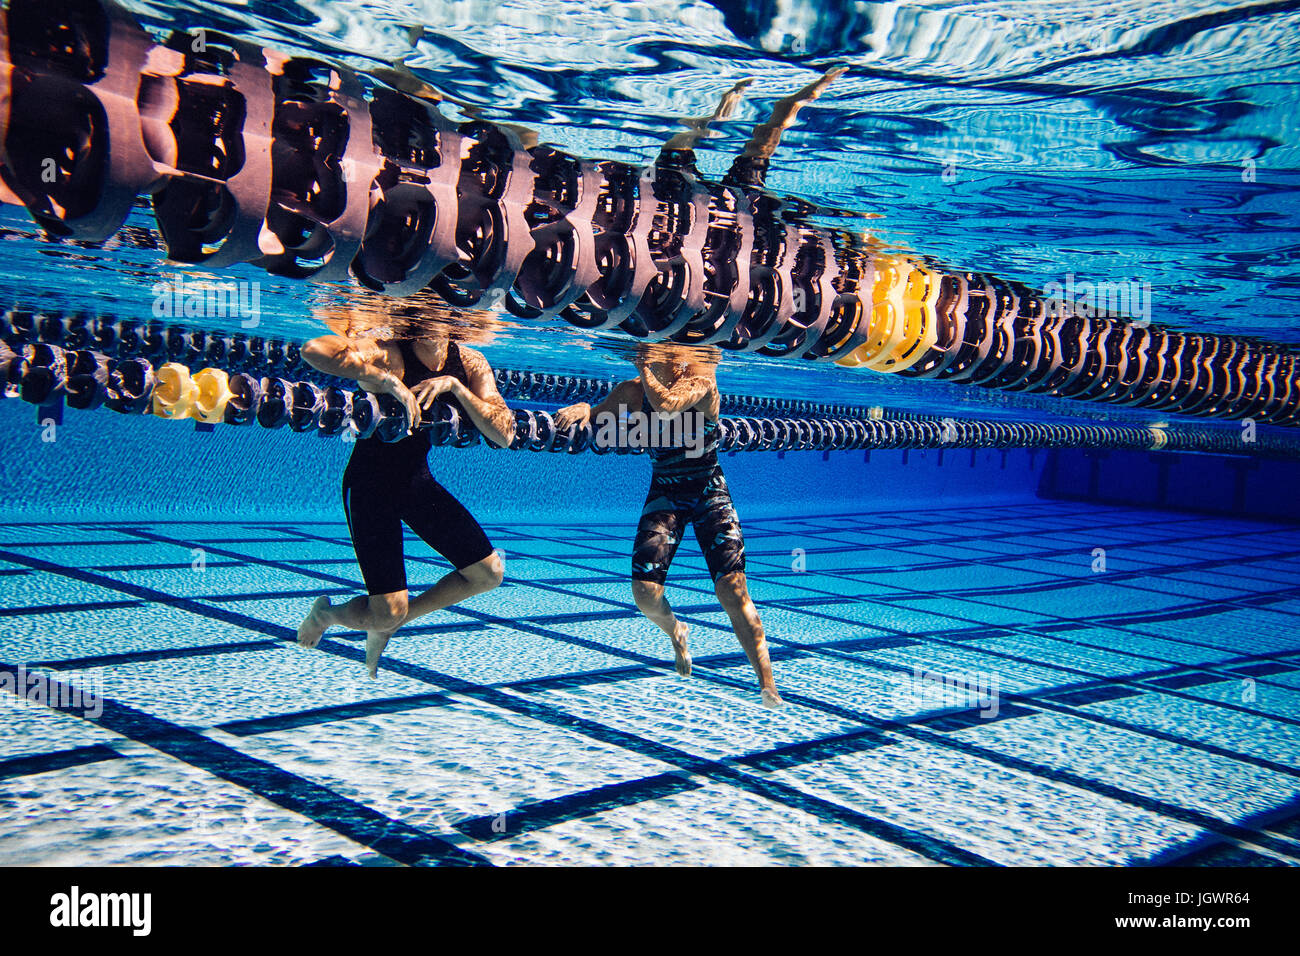 Swimmer resting on lane divider in pool talking to friend Stock Photo